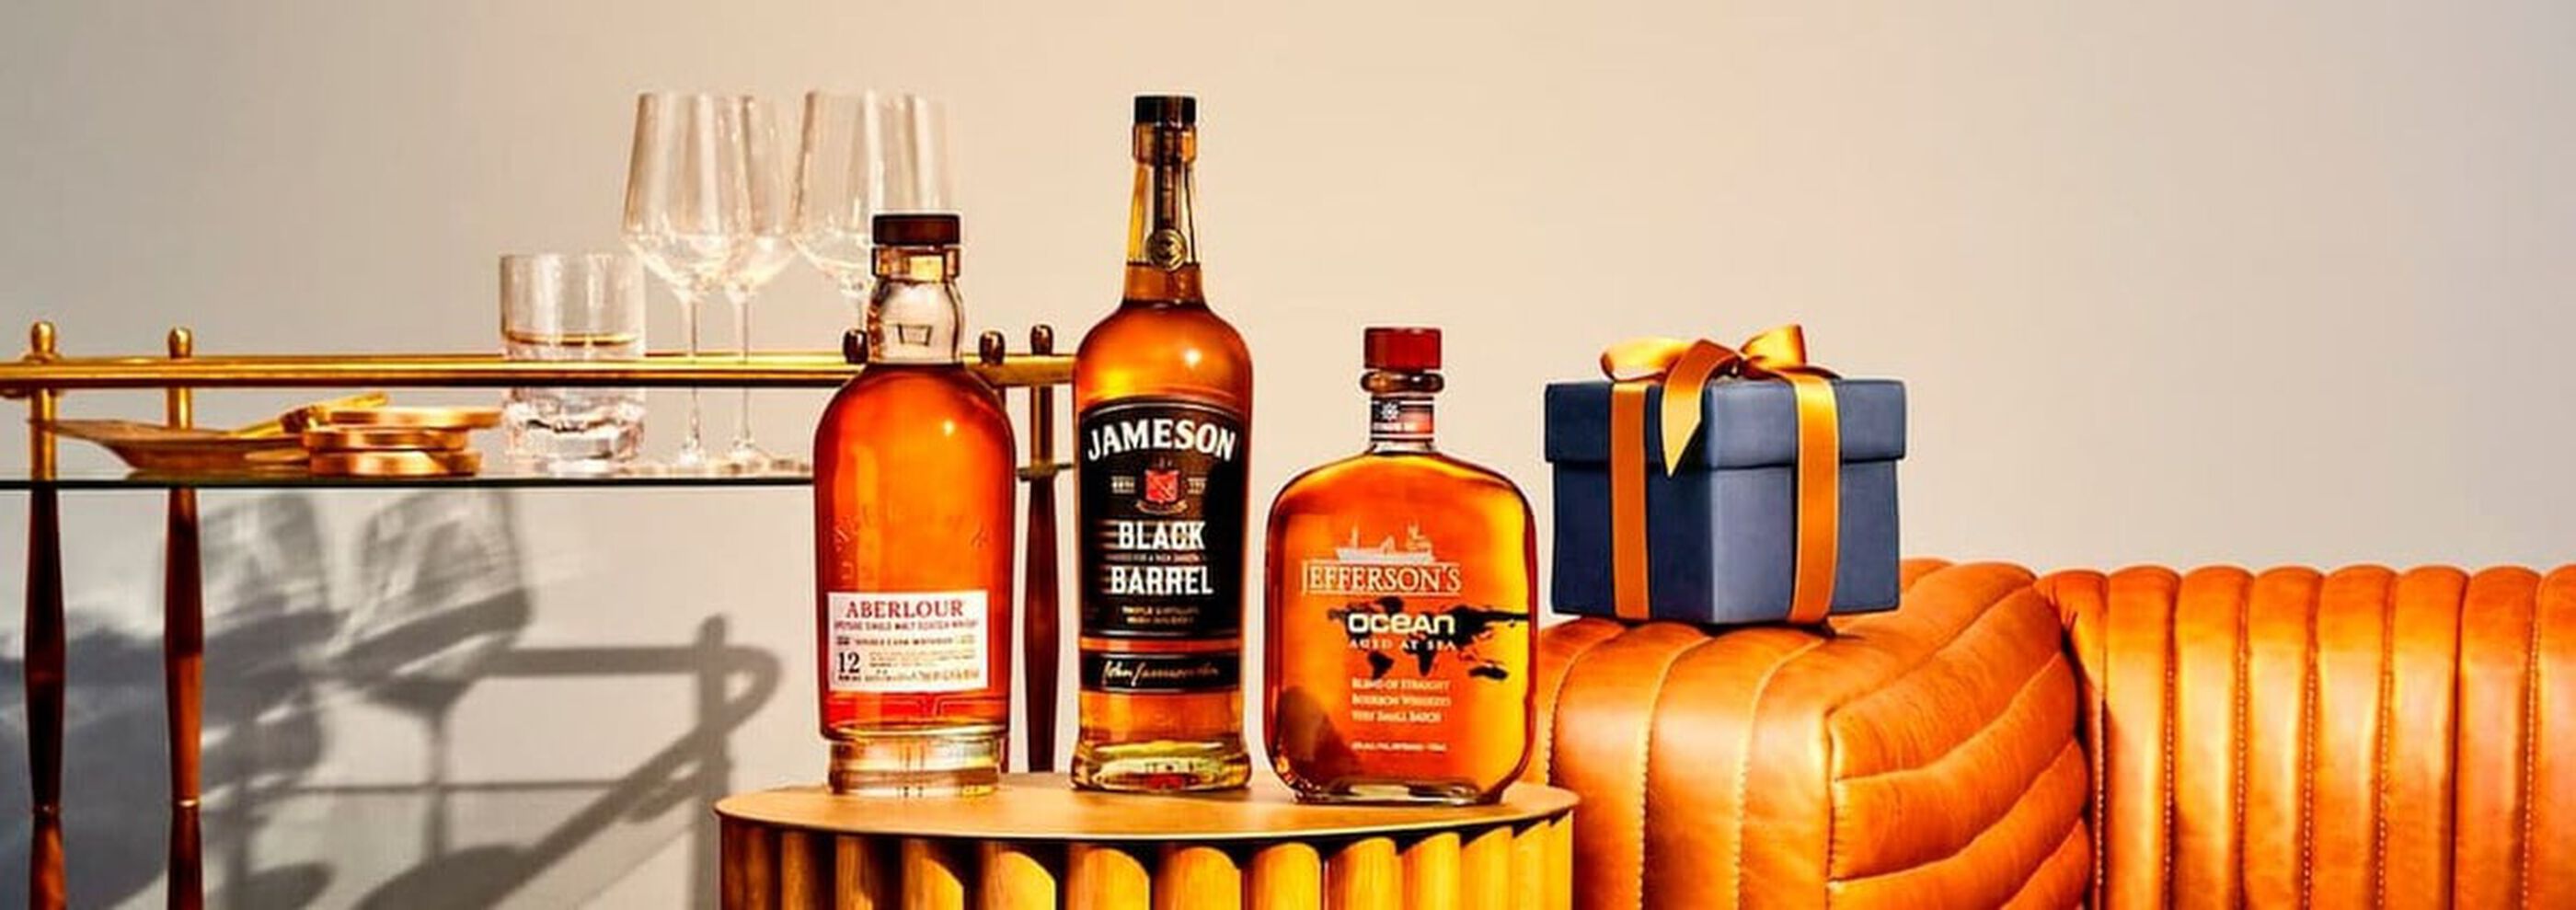 A collection of Father's Day spirits are ready to be opened on a leather couch